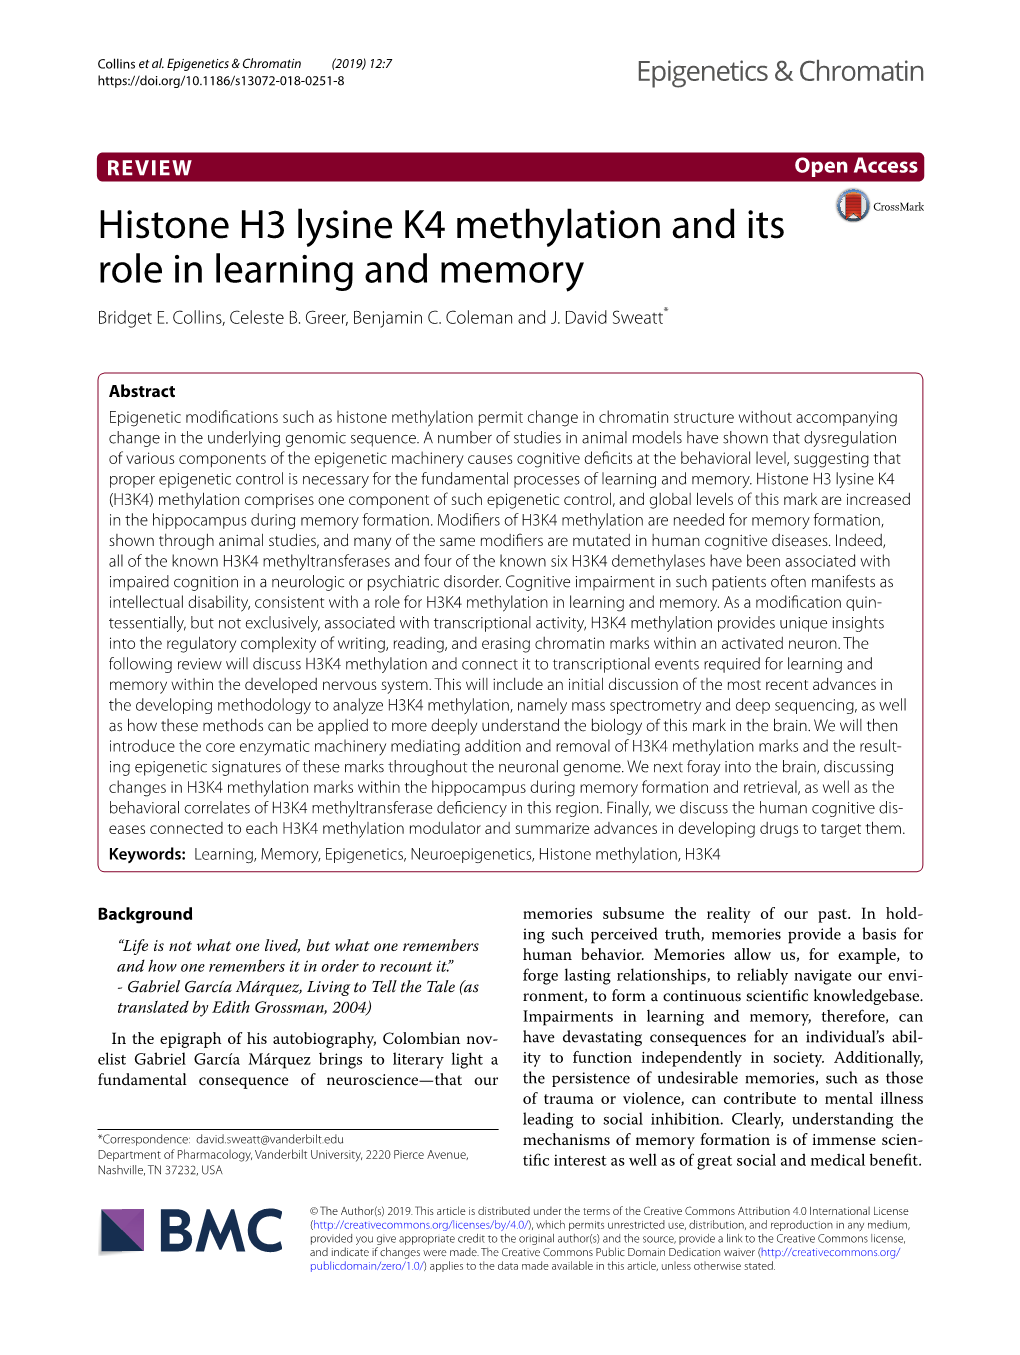 Histone H3 Lysine K4 Methylation and Its Role in Learning and Memory Bridget E